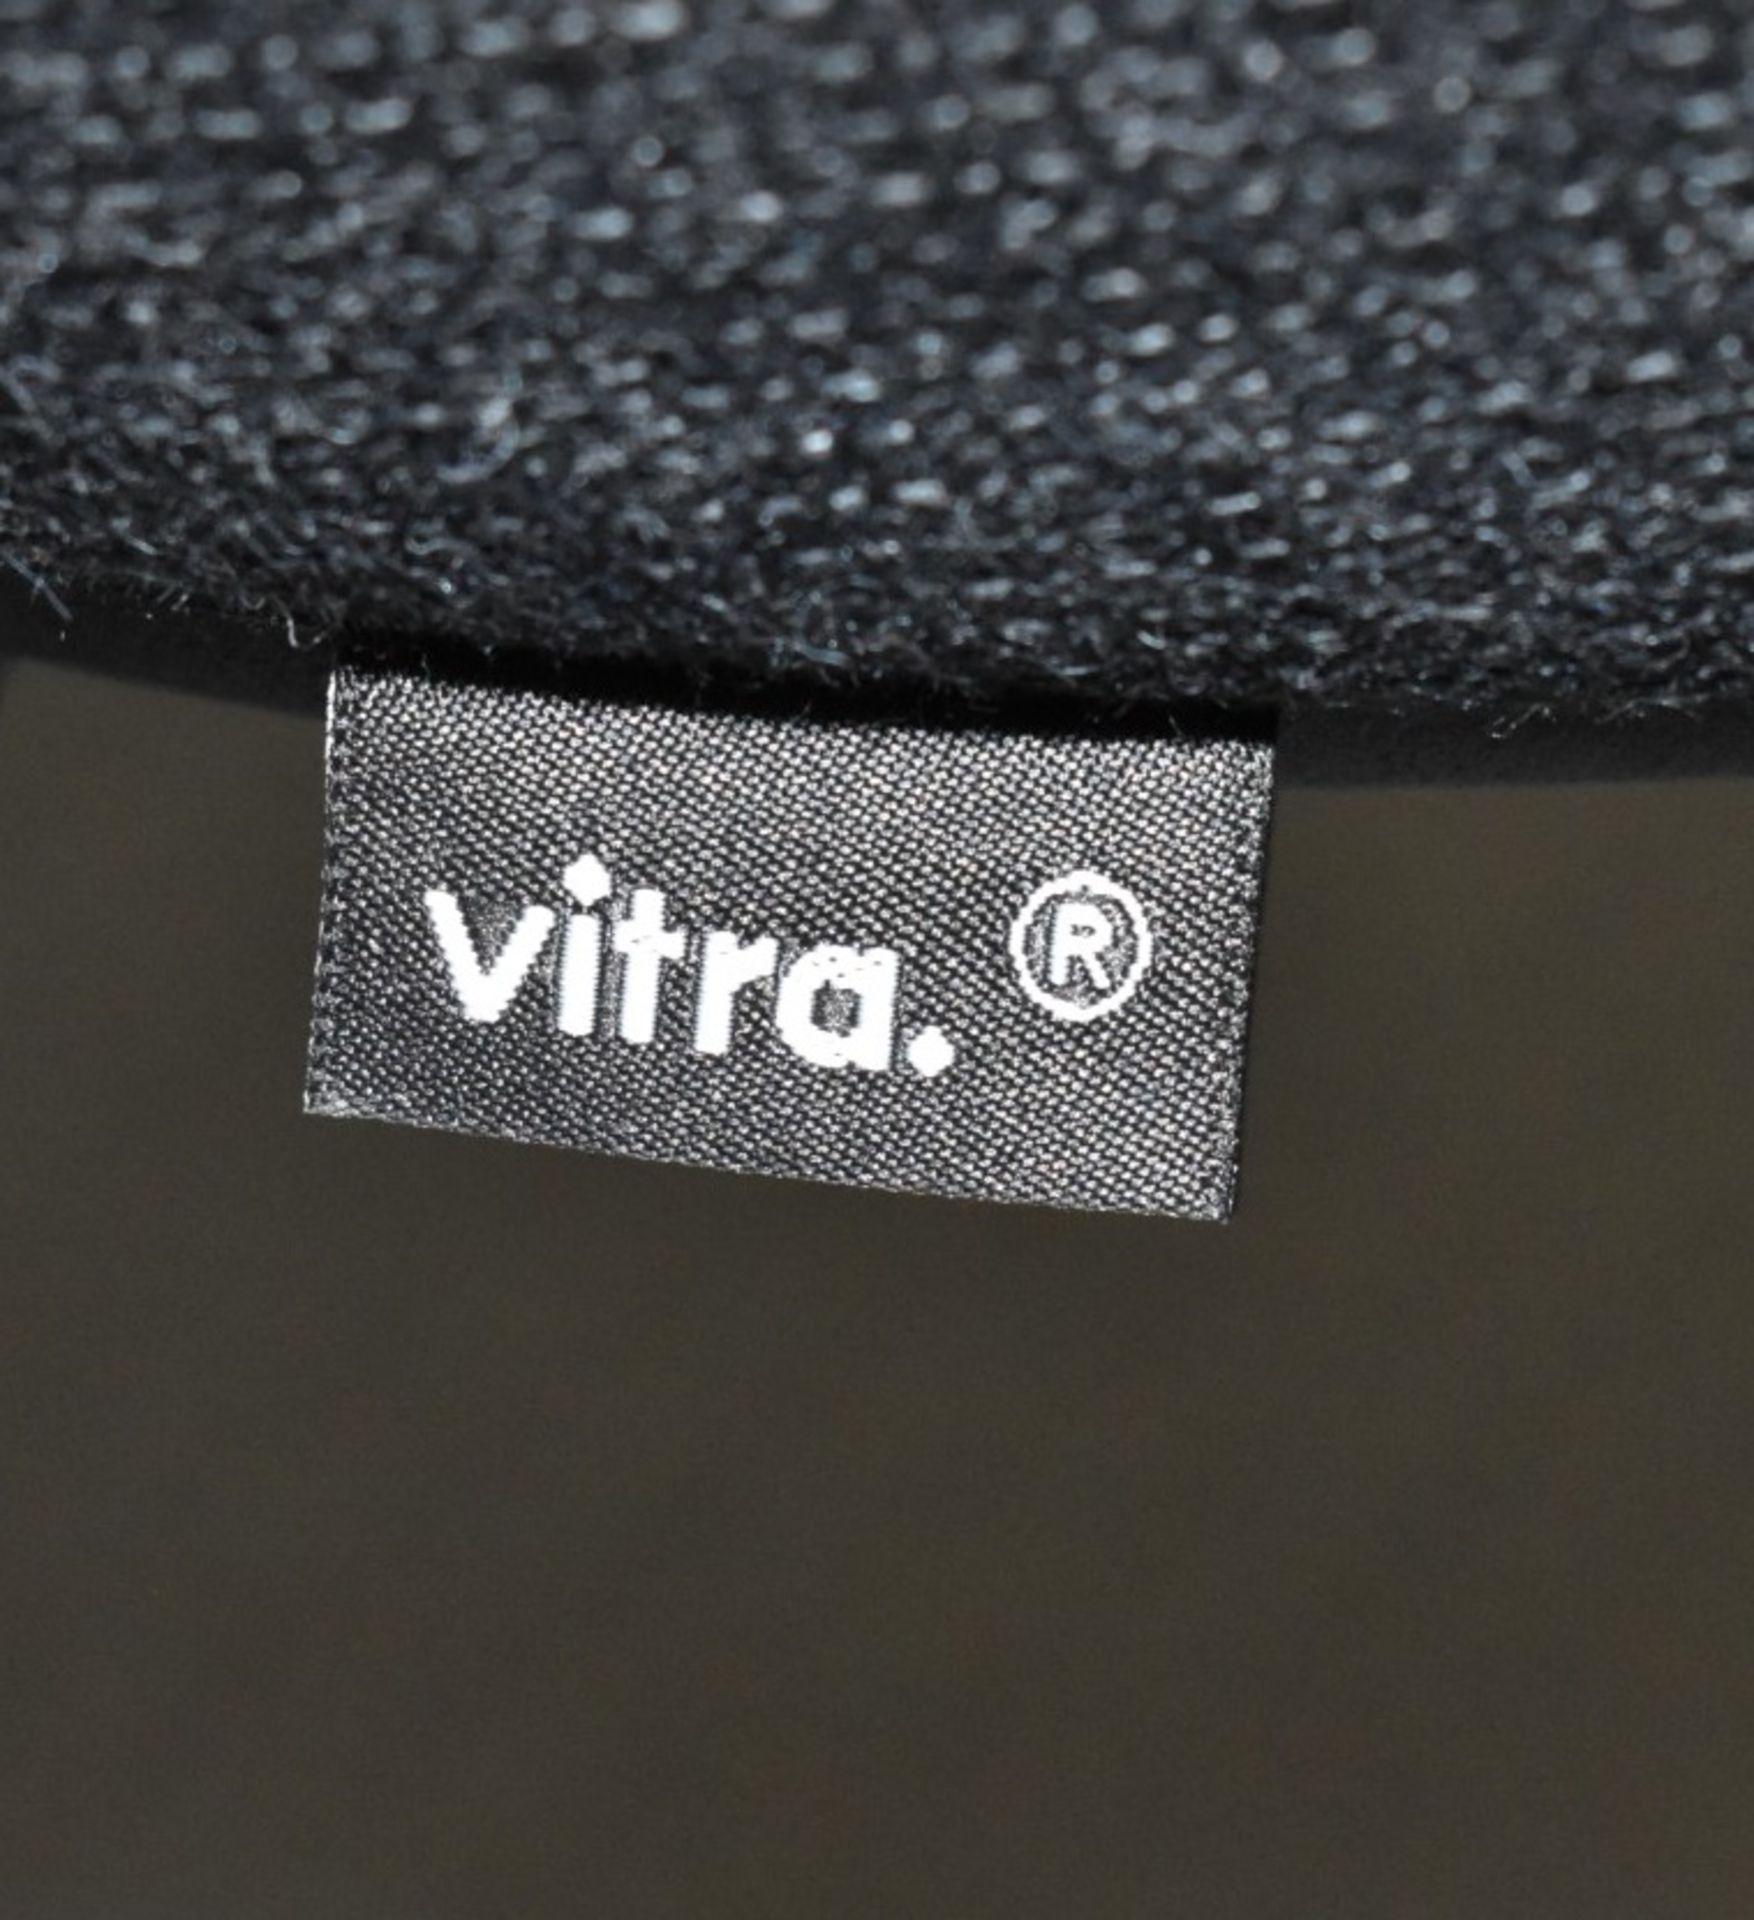 1 x VITRA 'Softshell' Fabric Upholstered Designer Plastic Armchair, in Anthracite Grey - RRP £885.00 - Image 9 of 9